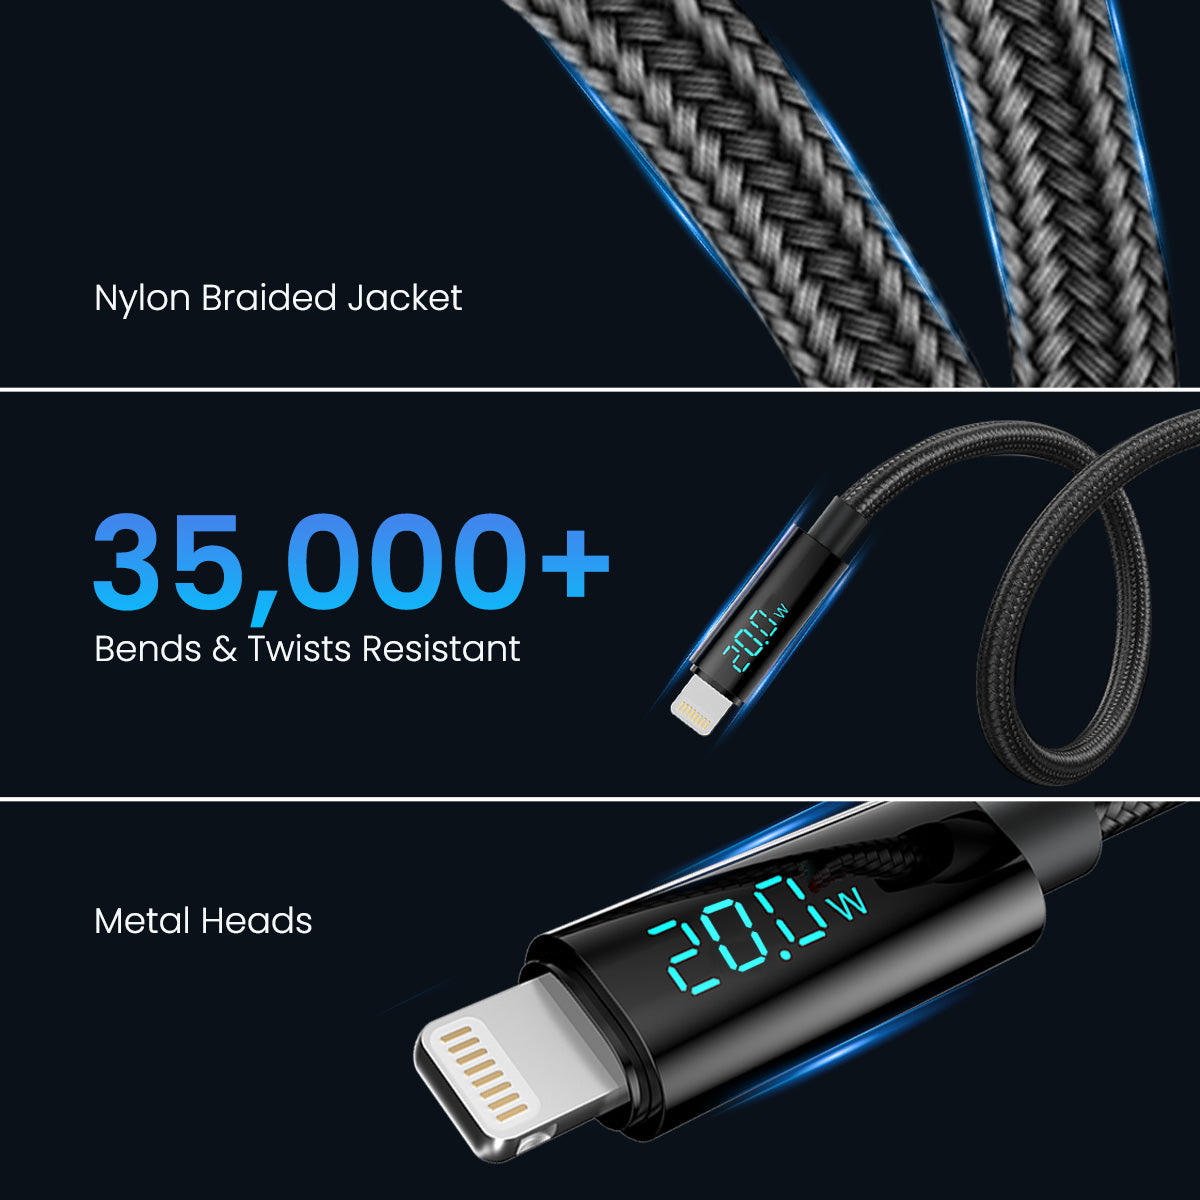 Black Portronics Konnect View - USB-A to 8 Pin Display Cable| Fast charging Cable for Iphone| high quality nylon braided cable